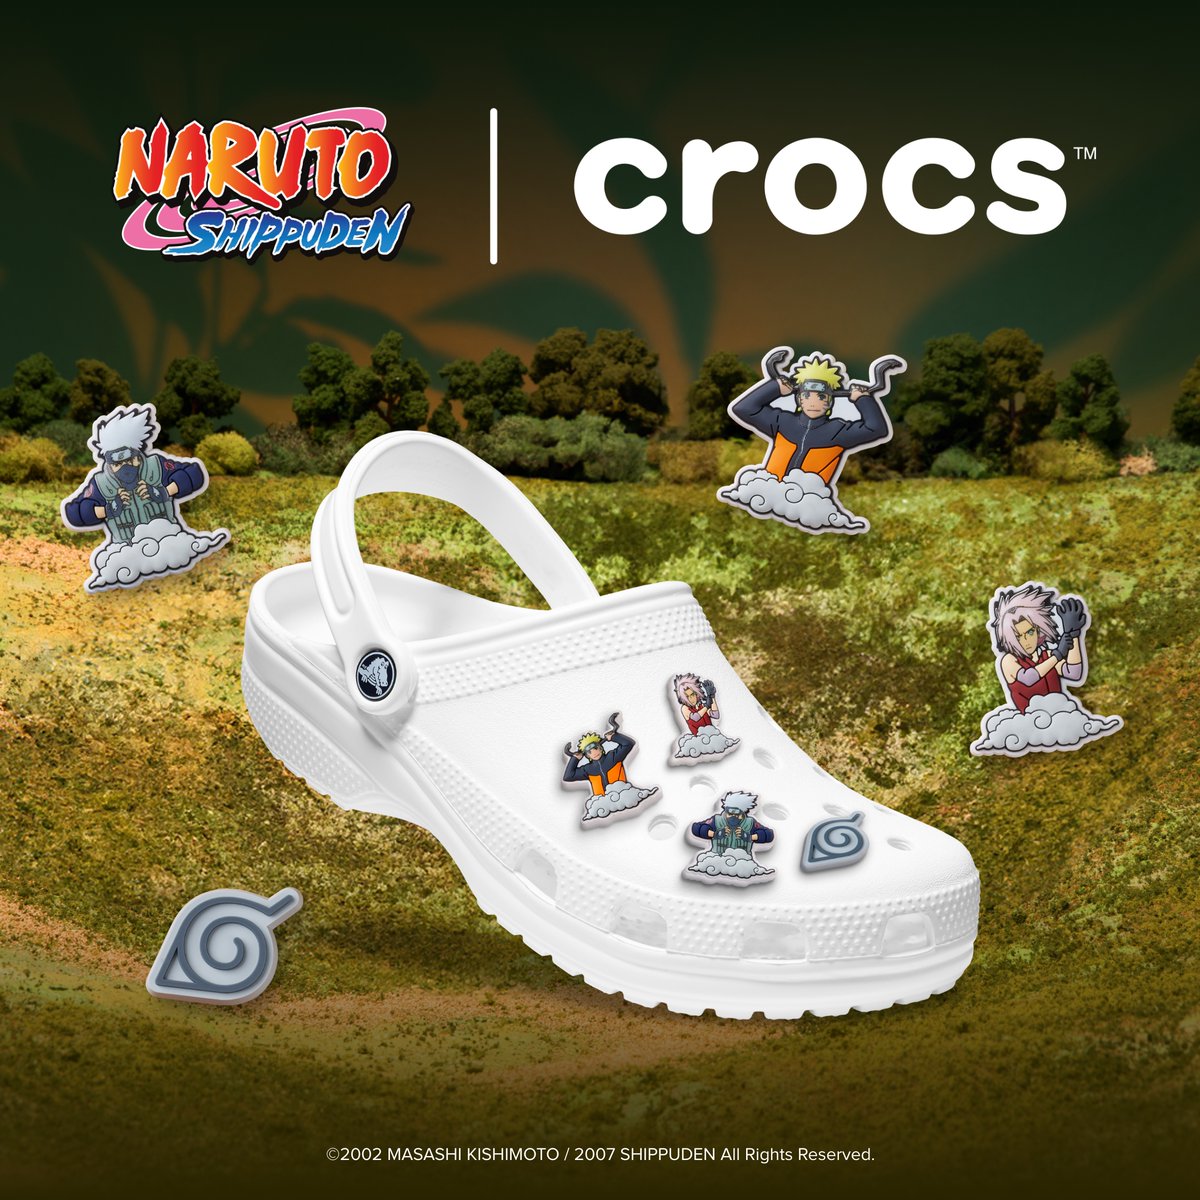 Naruto Shippuden Classic Clogs now available for anime fans everywhere - now at Journeys. #crocs #naruto #journeysGRWM